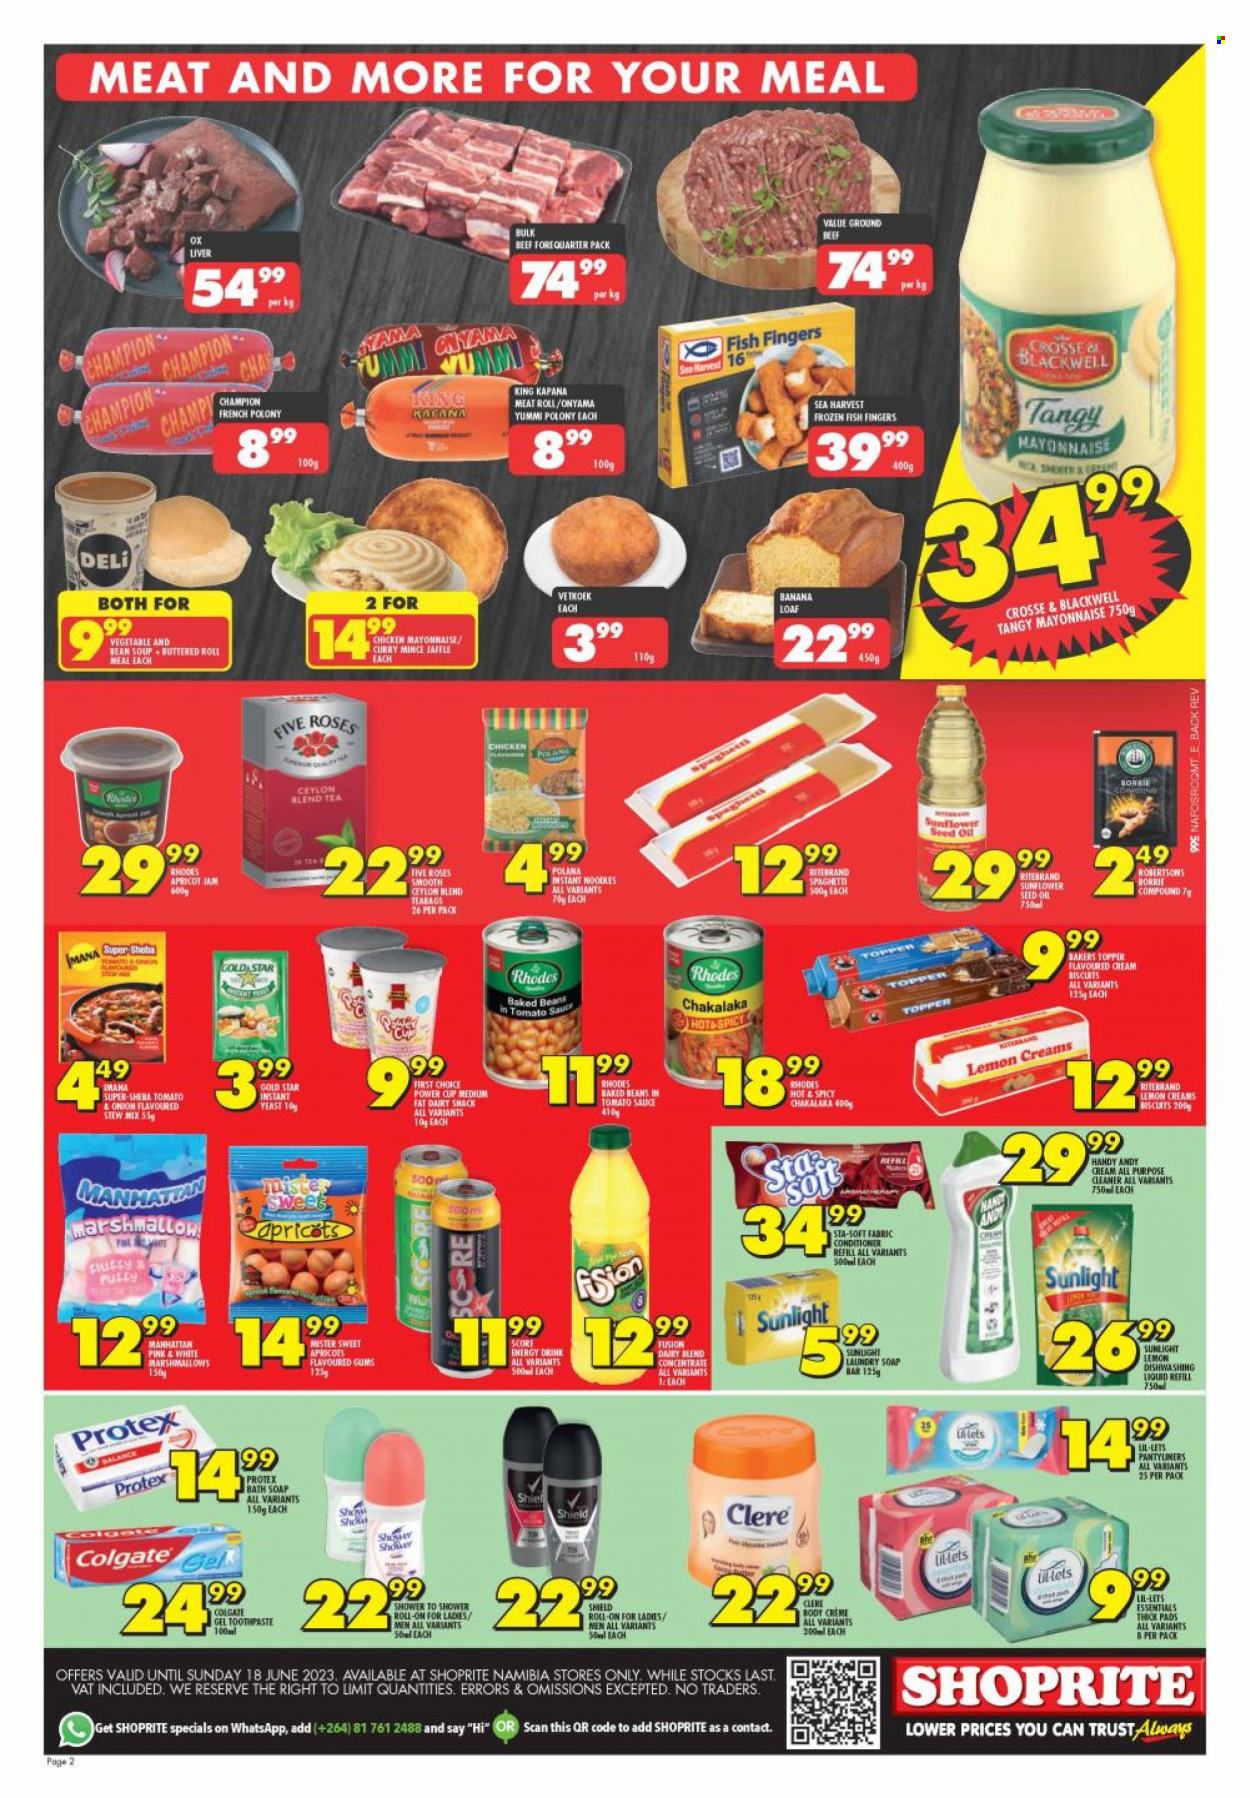 Shoprite catalogue  - 05/06/2023 - 18/06/2023 - Sales products - banana bread, beans, apricots, fish, fish fingers, Sea Harvest, fish sticks, spaghetti, soup, instant noodles, chakalaka, noodles, french polony, polony, dairy blend, yeast, mayonnaise, marshmallows, biscuit, baked beans, sunflower oil, apricot jam, fruit jam, energy drink, tea, tea bags, chicken, beef liver, beef meat, ground beef, all purpose cleaner, cleaner, fabric conditioner, laundry soap bar, Sunlight, dishwashing liquid, Protex, Colgate, toothpaste, pantyliners, Lil-lets, Clere. Page 2.